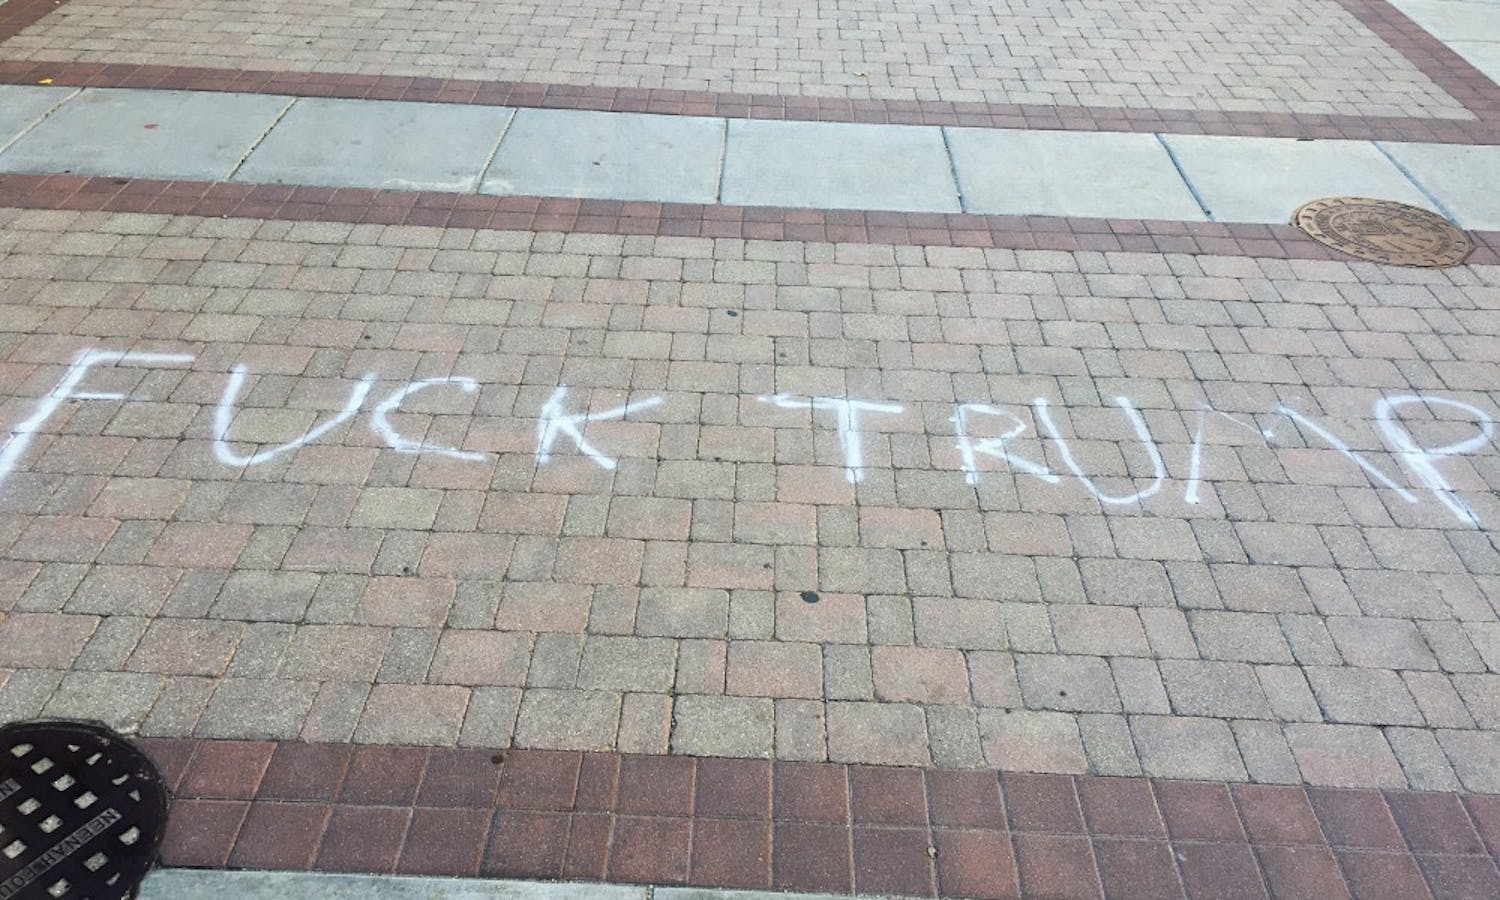 Two phrases, one reading “Fuck Trump” and the other “Black Lives Matter,” were spray-painted on East Campus Mall Wednesday.